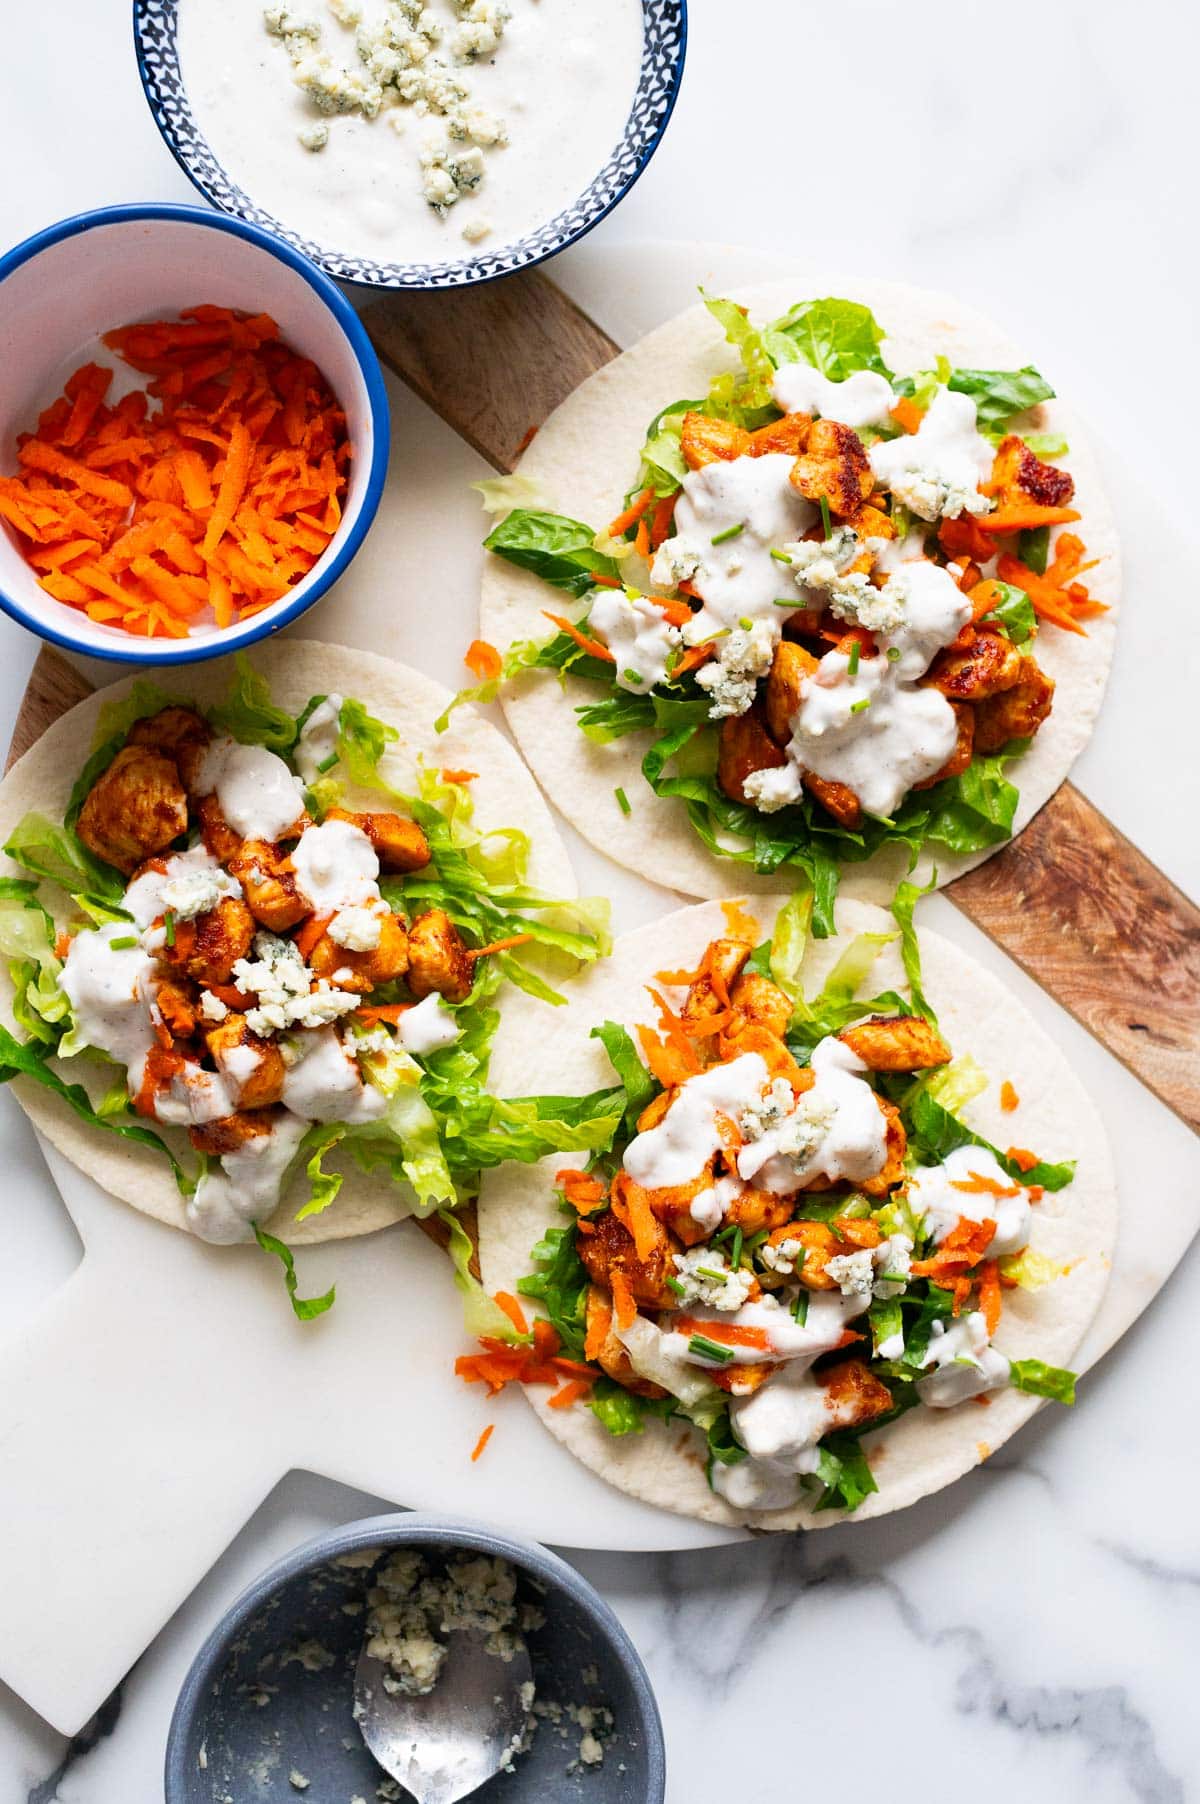 Buffalo chicken tacos drizzled with blue cheese dressing on a marble board. Shredded carrots and dressing in bowls.